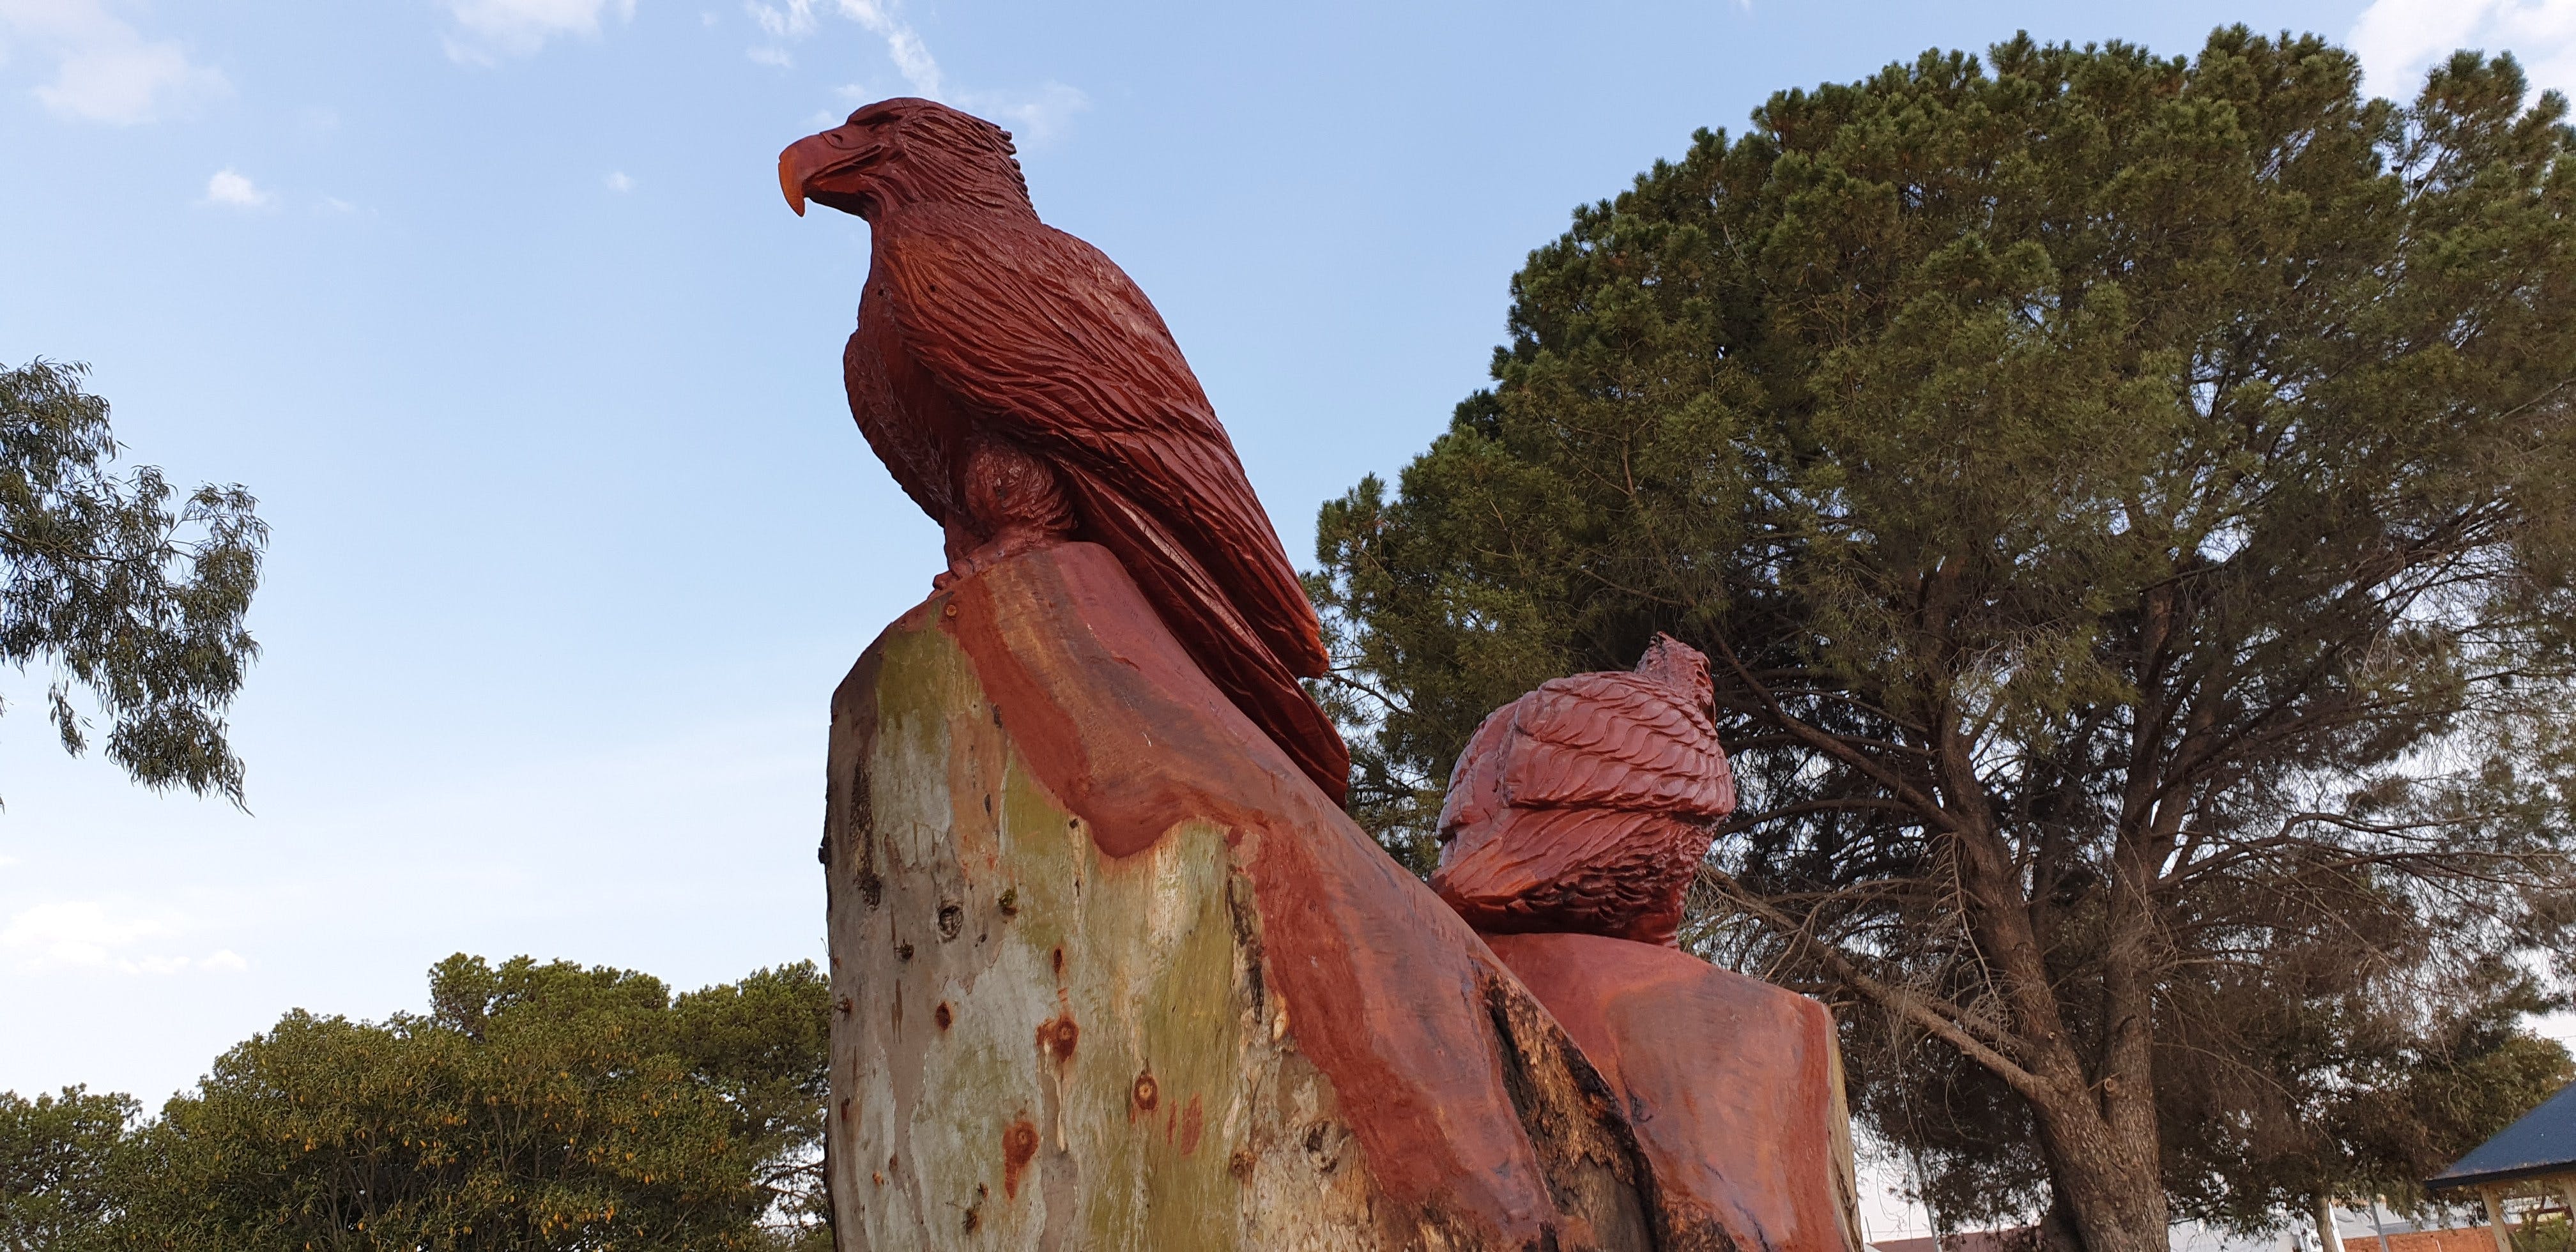 Chainsaw Tree Sculpture - Tourism Adelaide